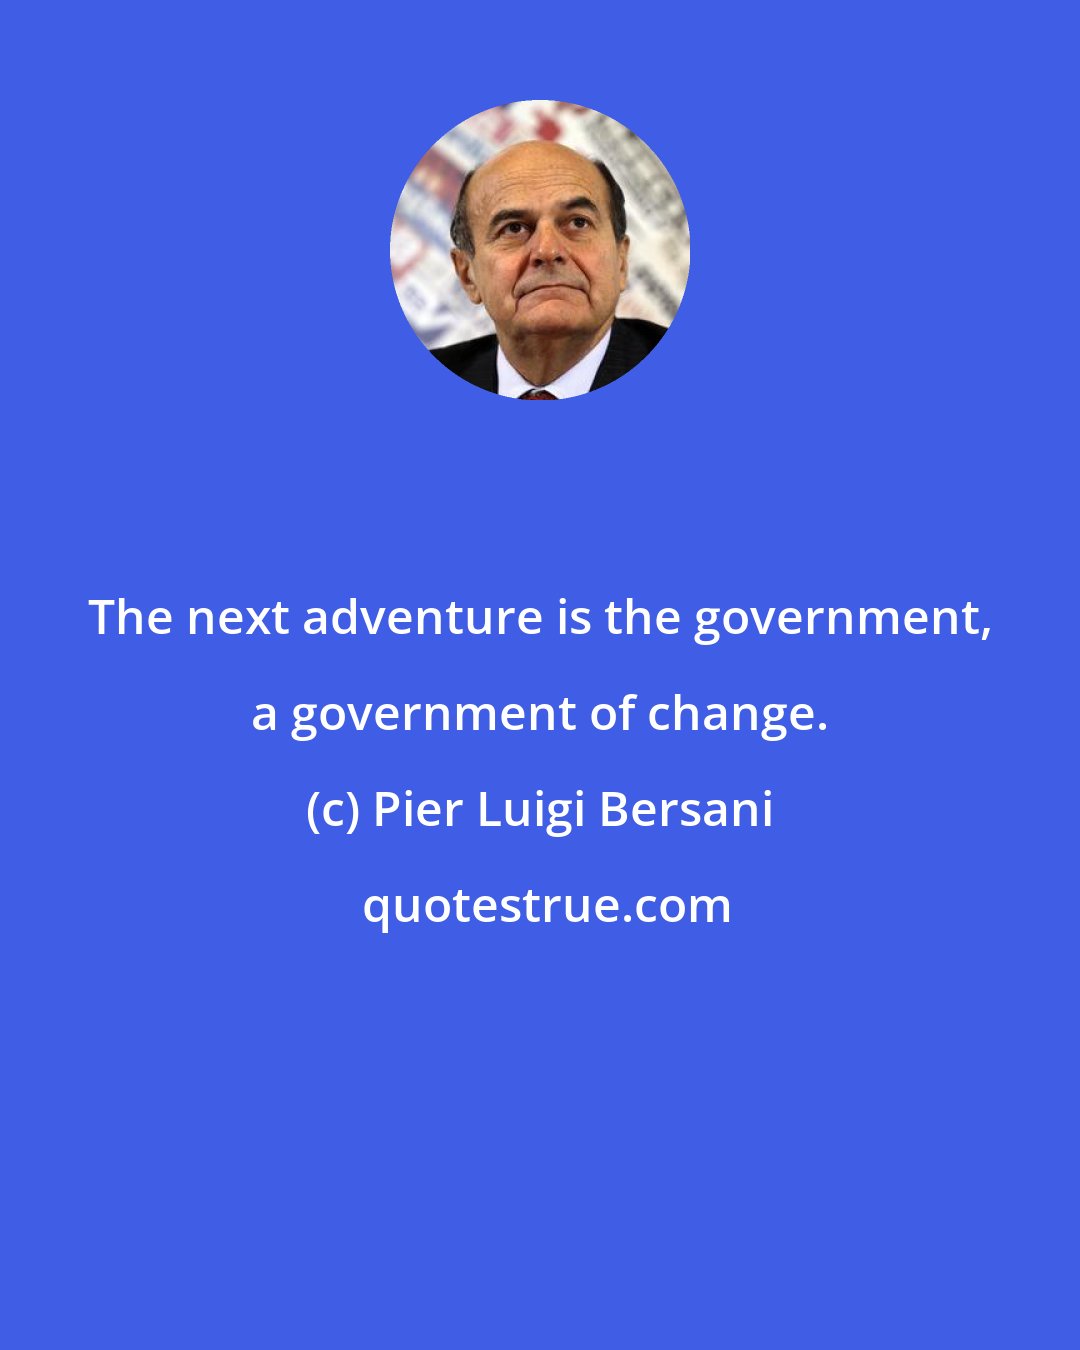 Pier Luigi Bersani: The next adventure is the government, a government of change.